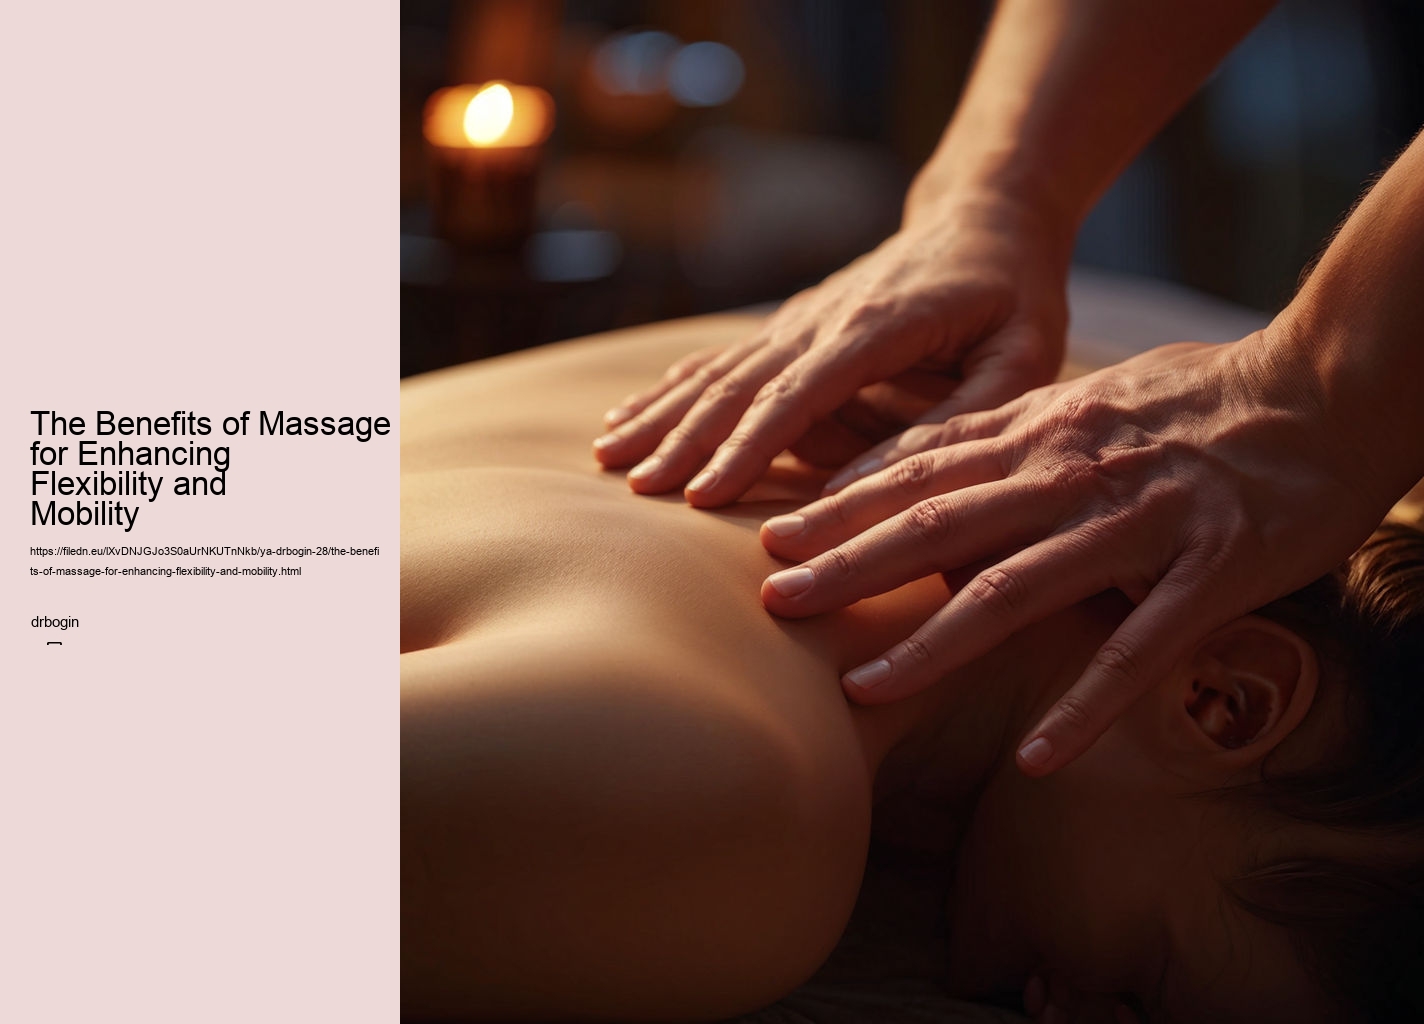 The Benefits of Massage for Enhancing Flexibility and Mobility